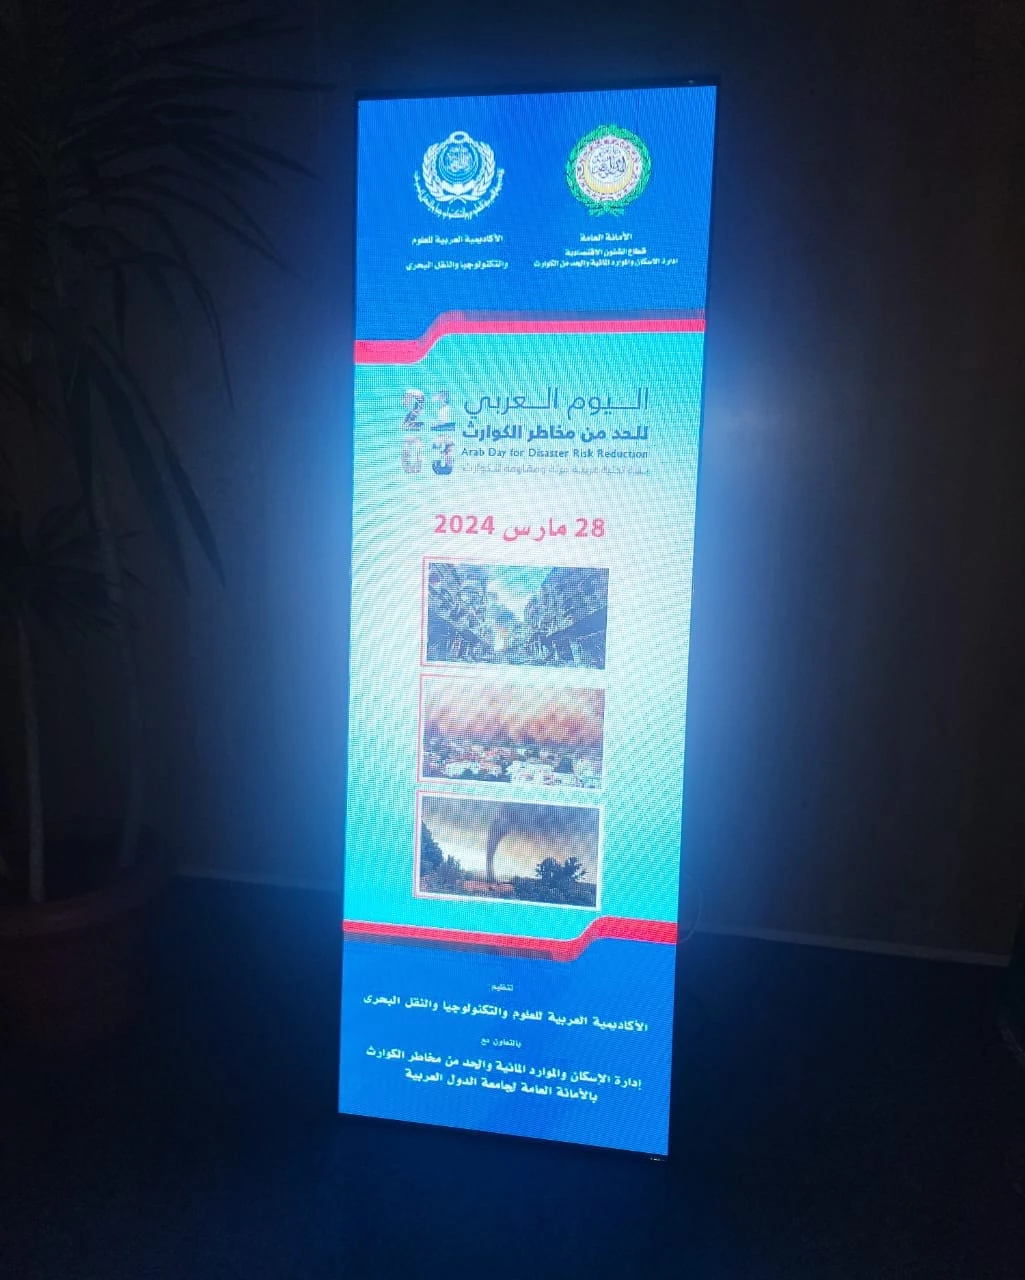 Activities of the Arab Day for Disaster Risk Reduction in 20248